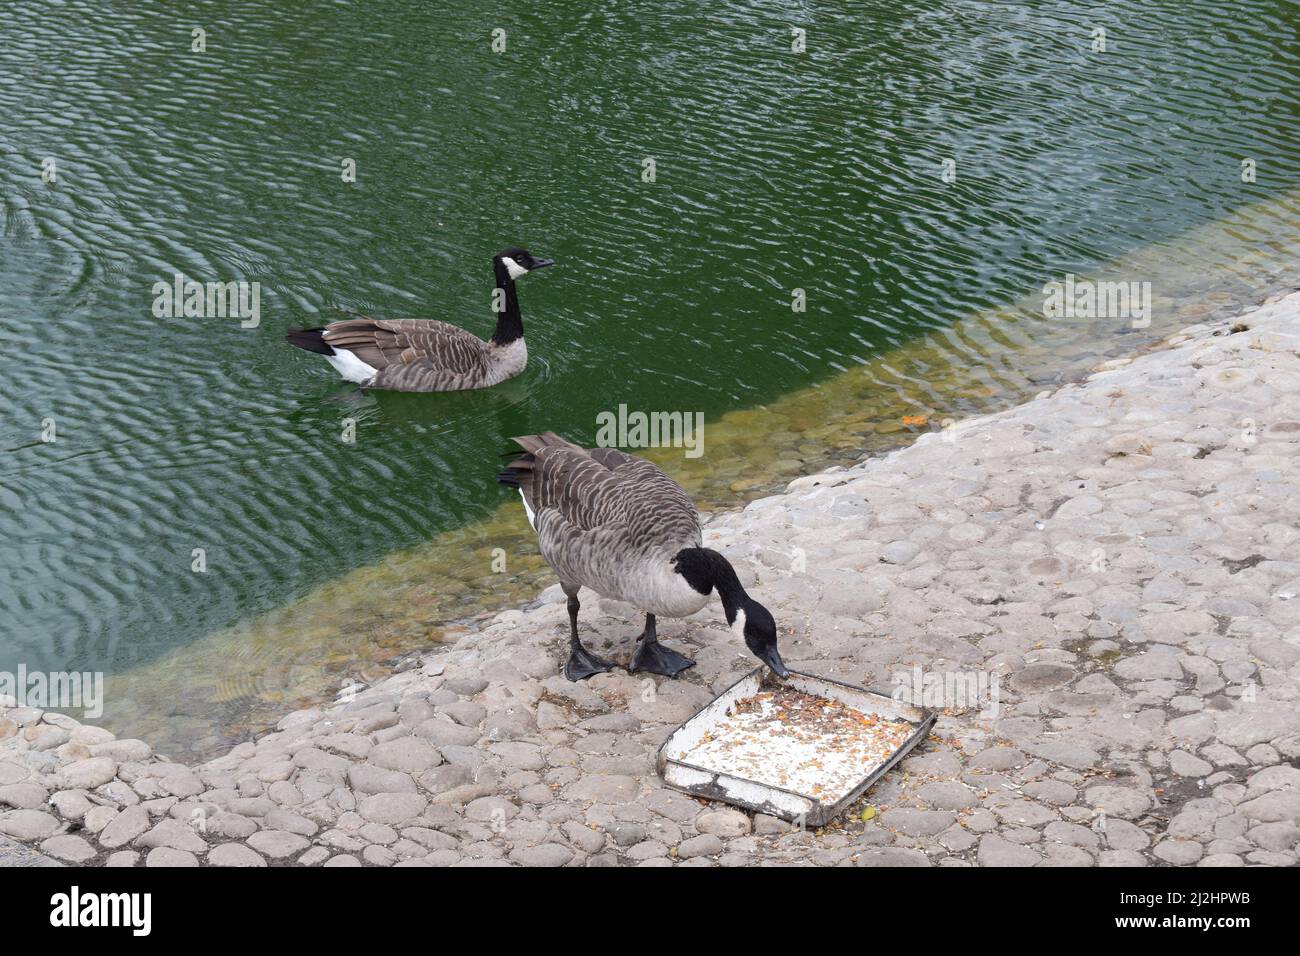 Canada gooses. Canada goose, Branta canadensis, bird on water and one bird is feeding Stock Photo